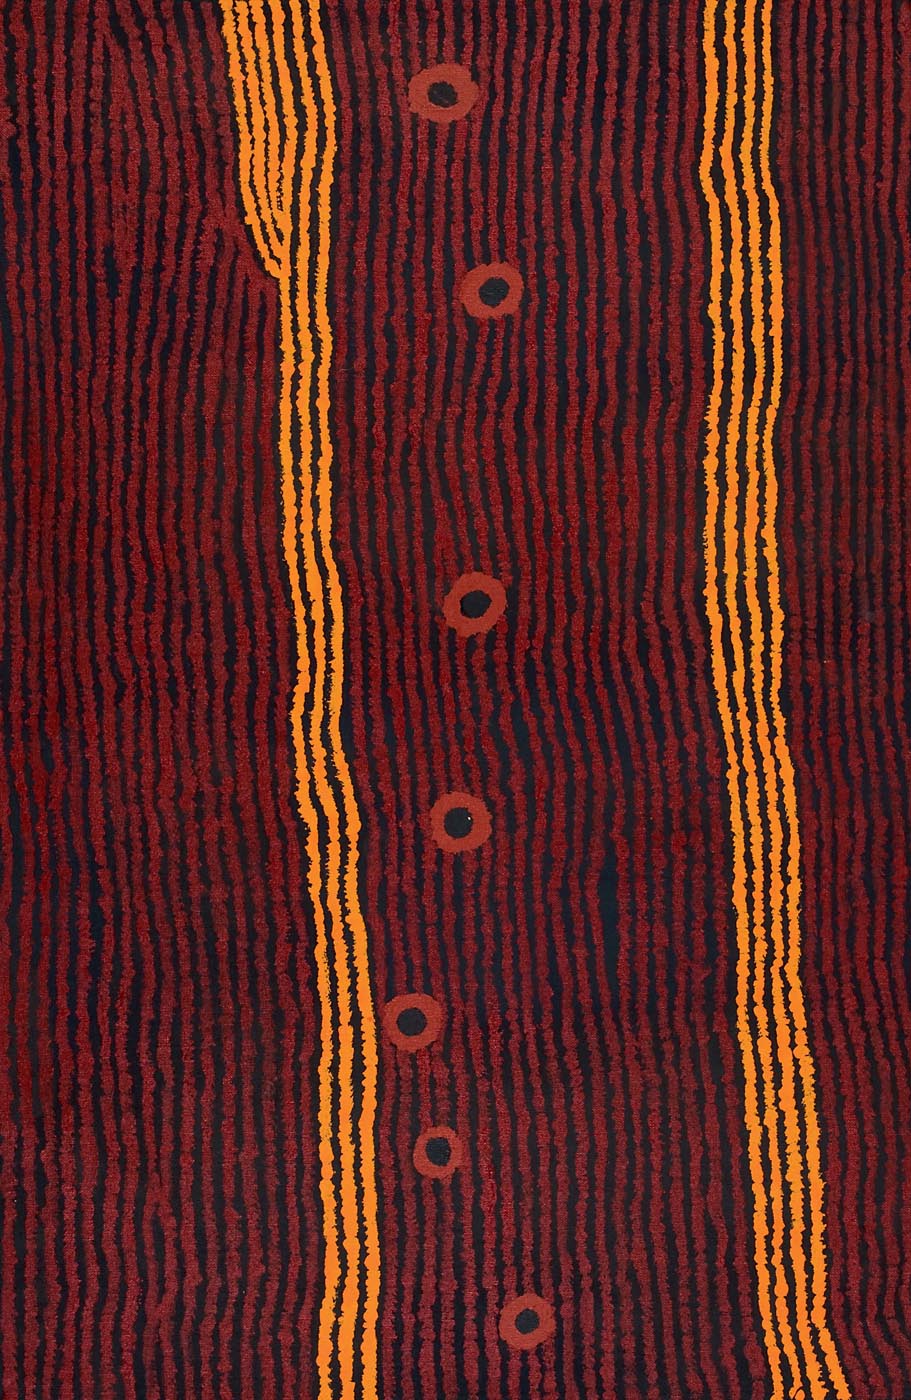 A painting on brown linen with a black background overlaid with vertical stripes in dark red with two narrow vertical sections in orange stripes. In between these orange sections there is a wavy vertical row of brown and black circles. - click to view larger image